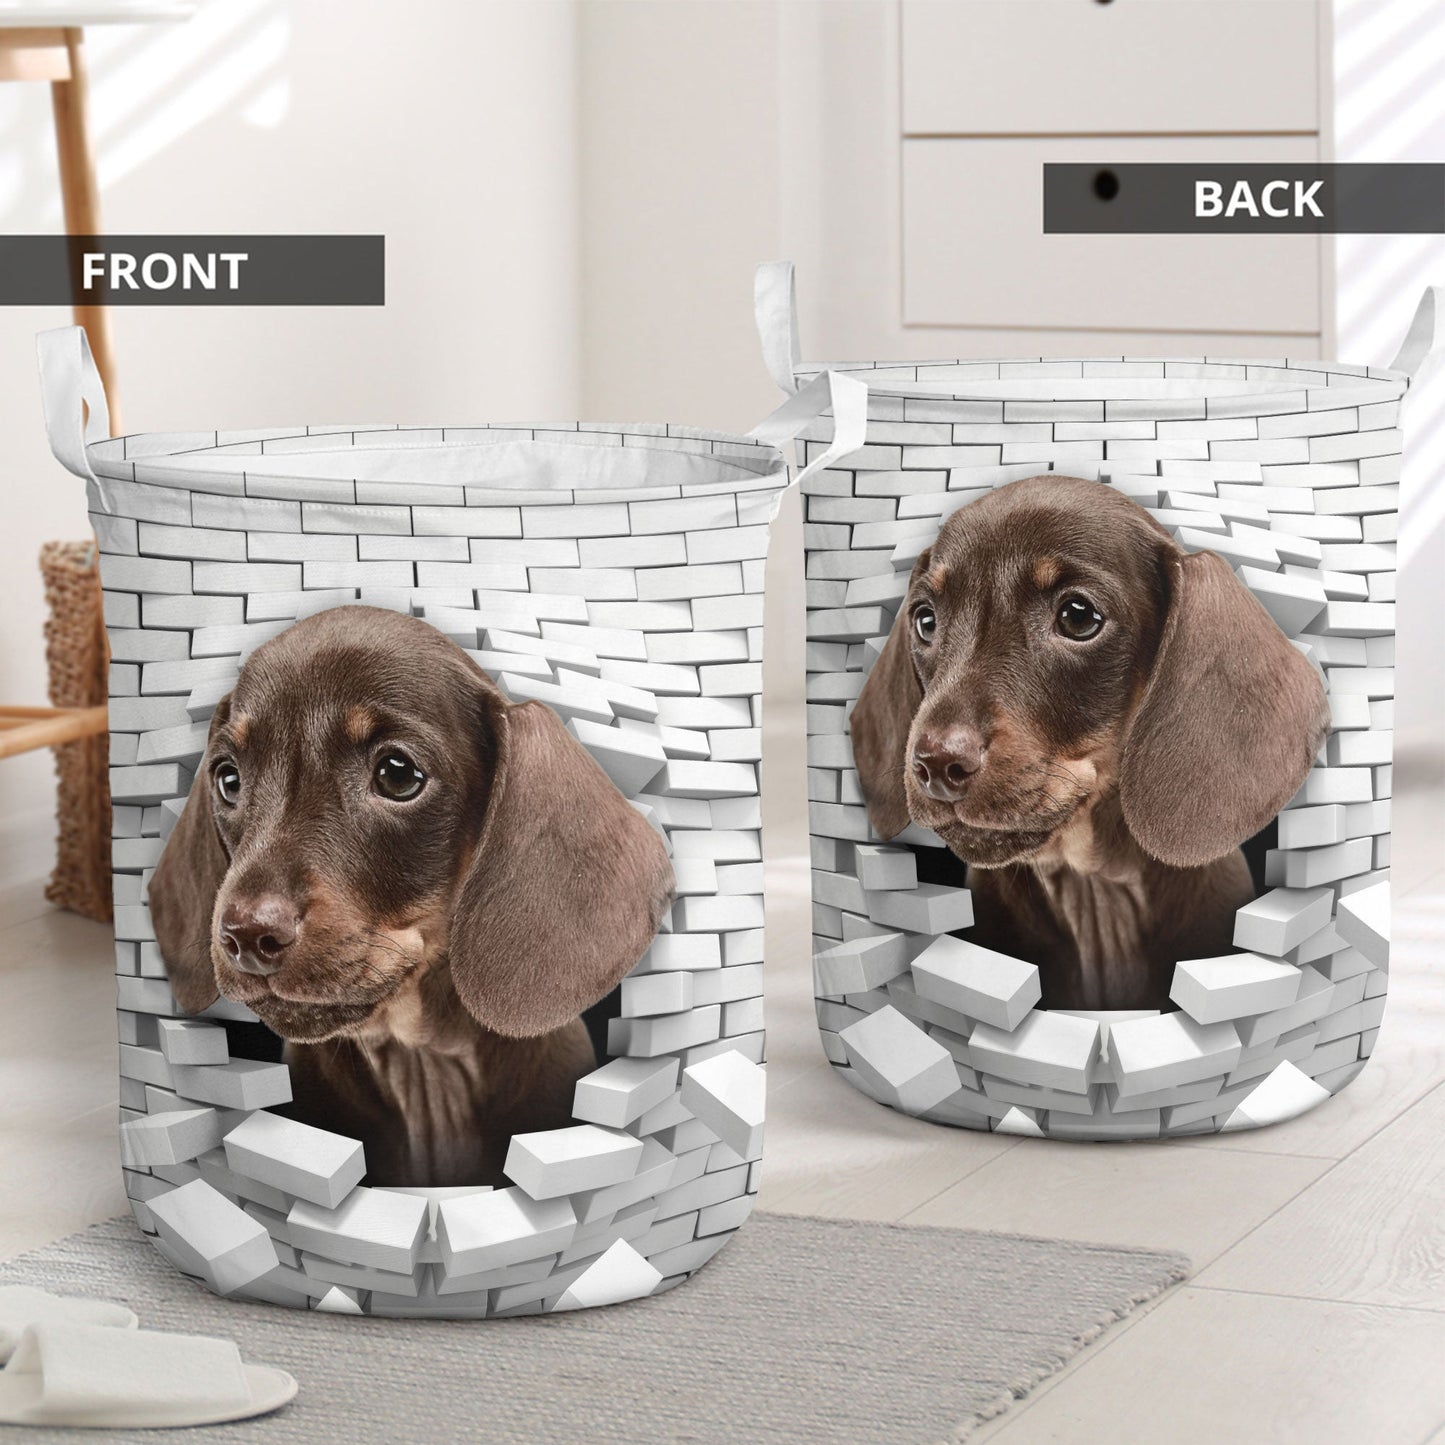 Dachshund - In The Hole Of Wall Pattern Laundry Basket